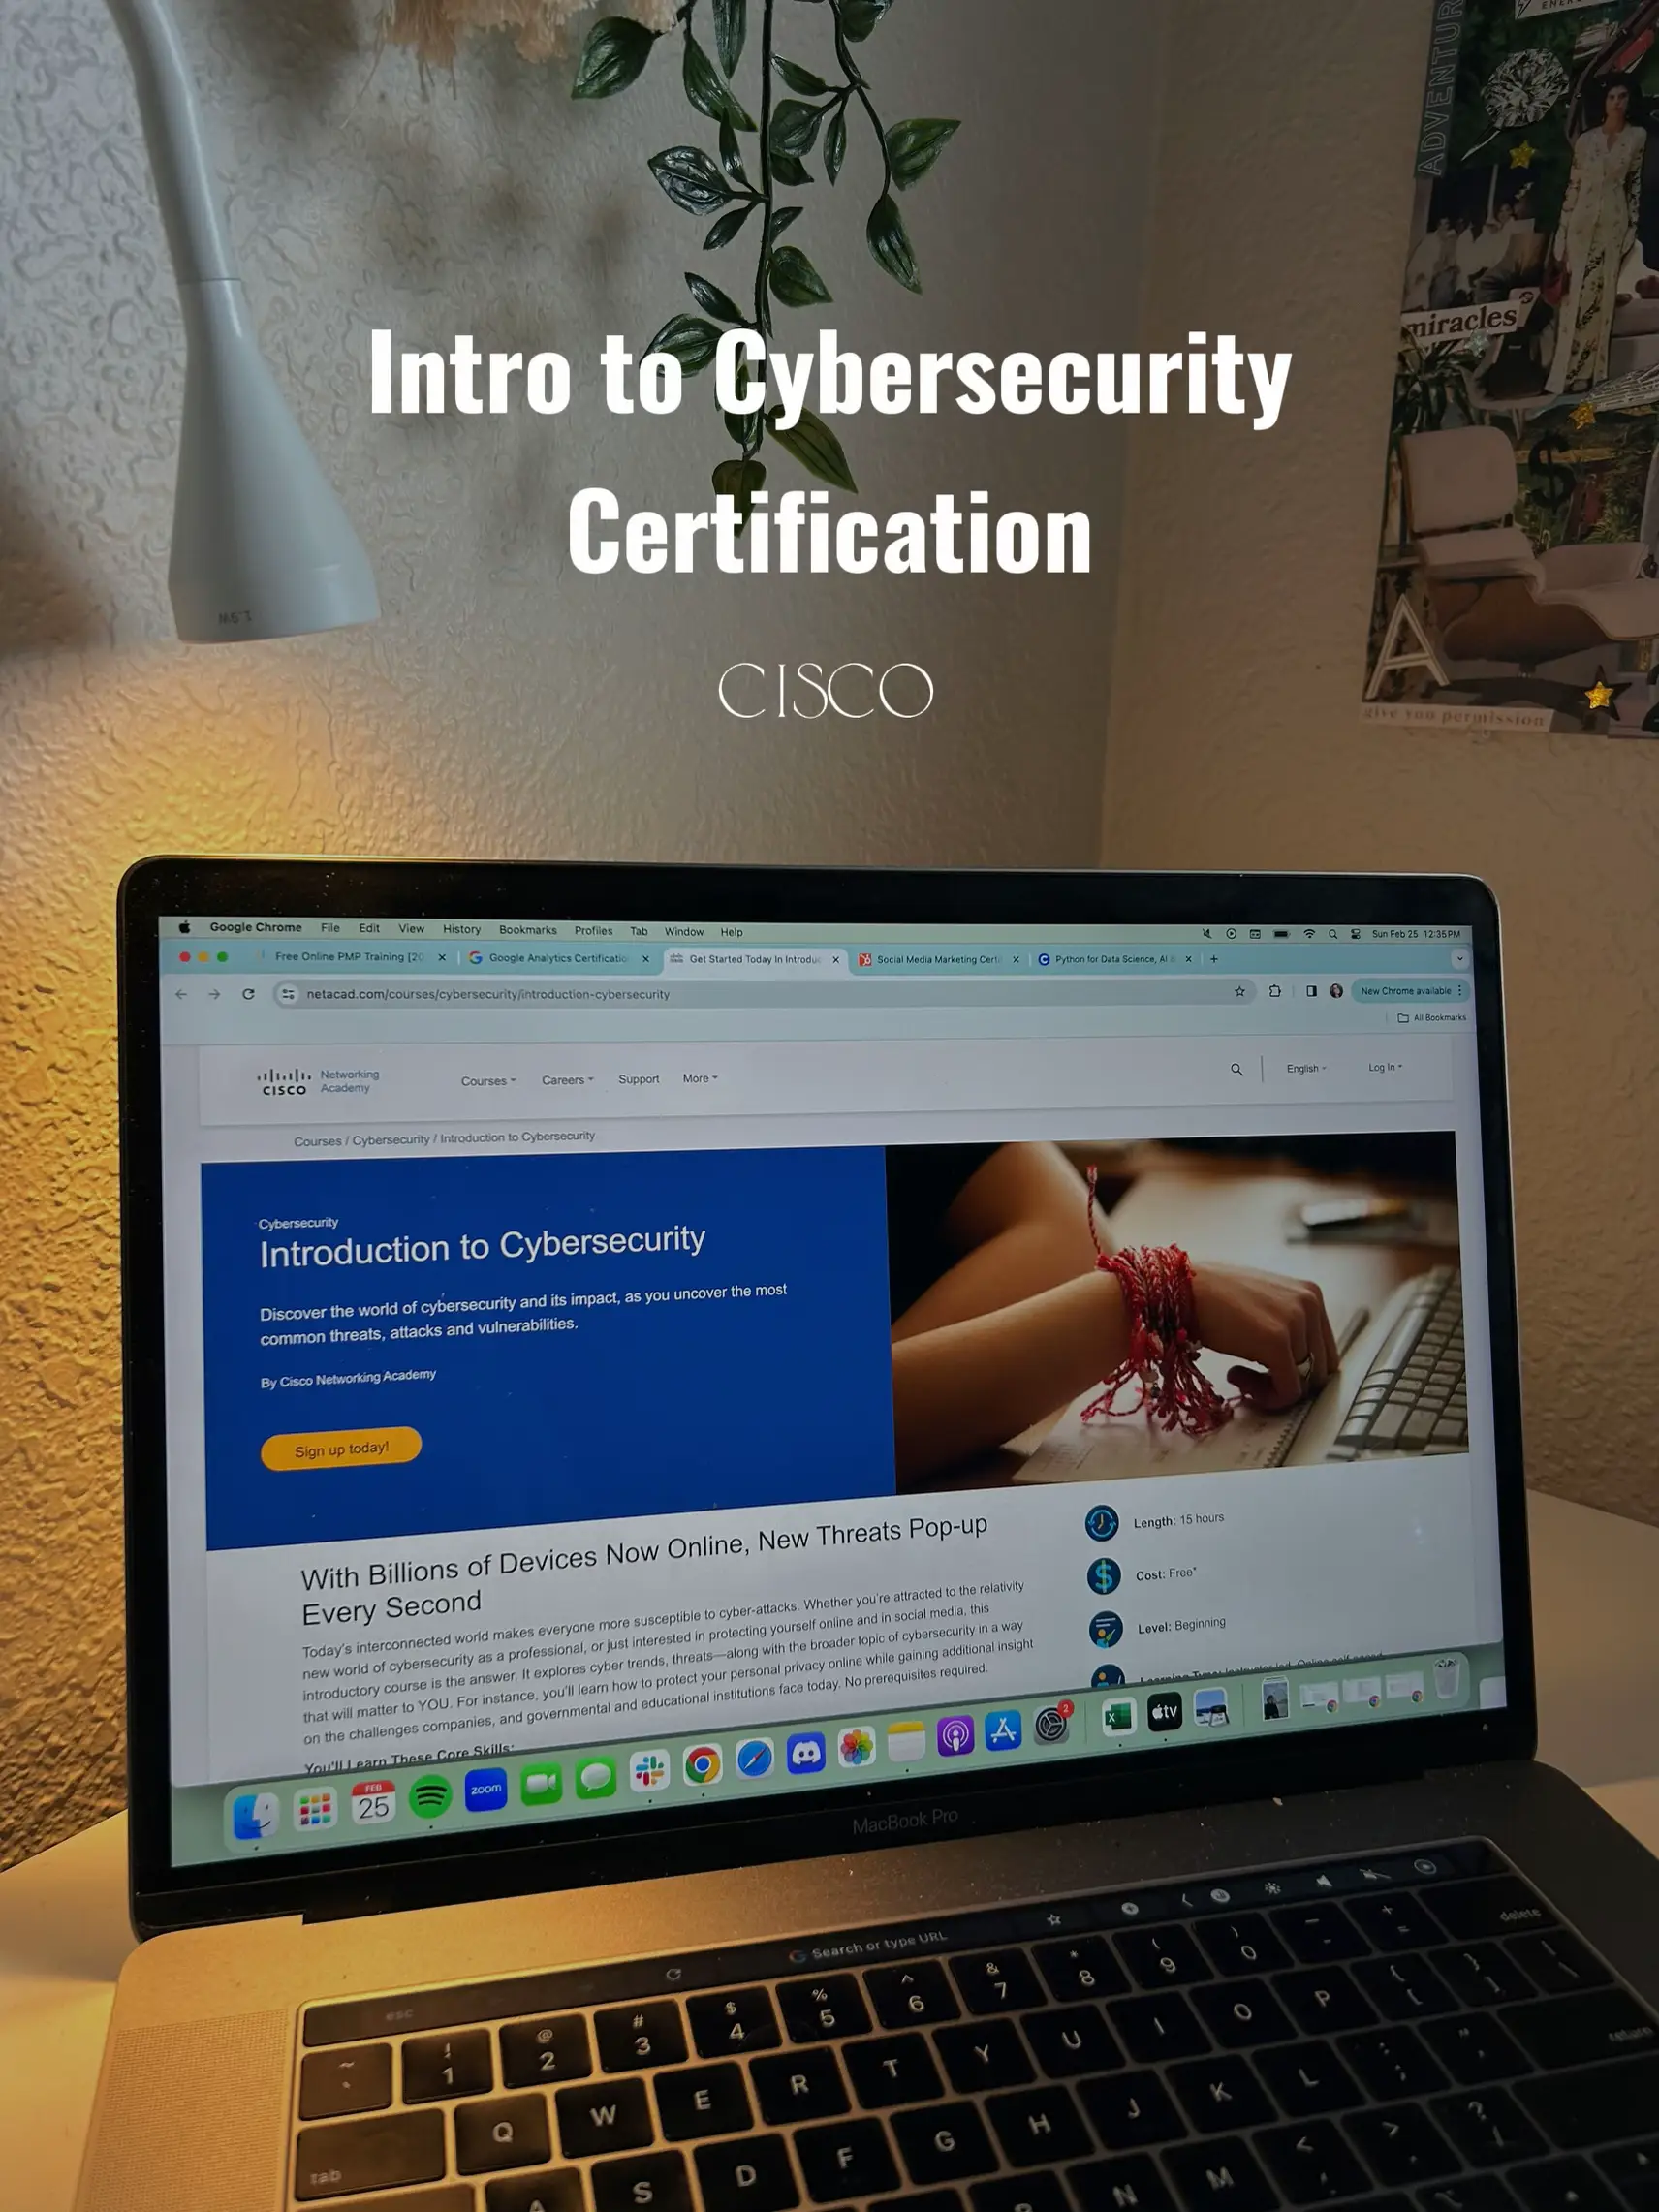  help you become a cybersecurity professional.